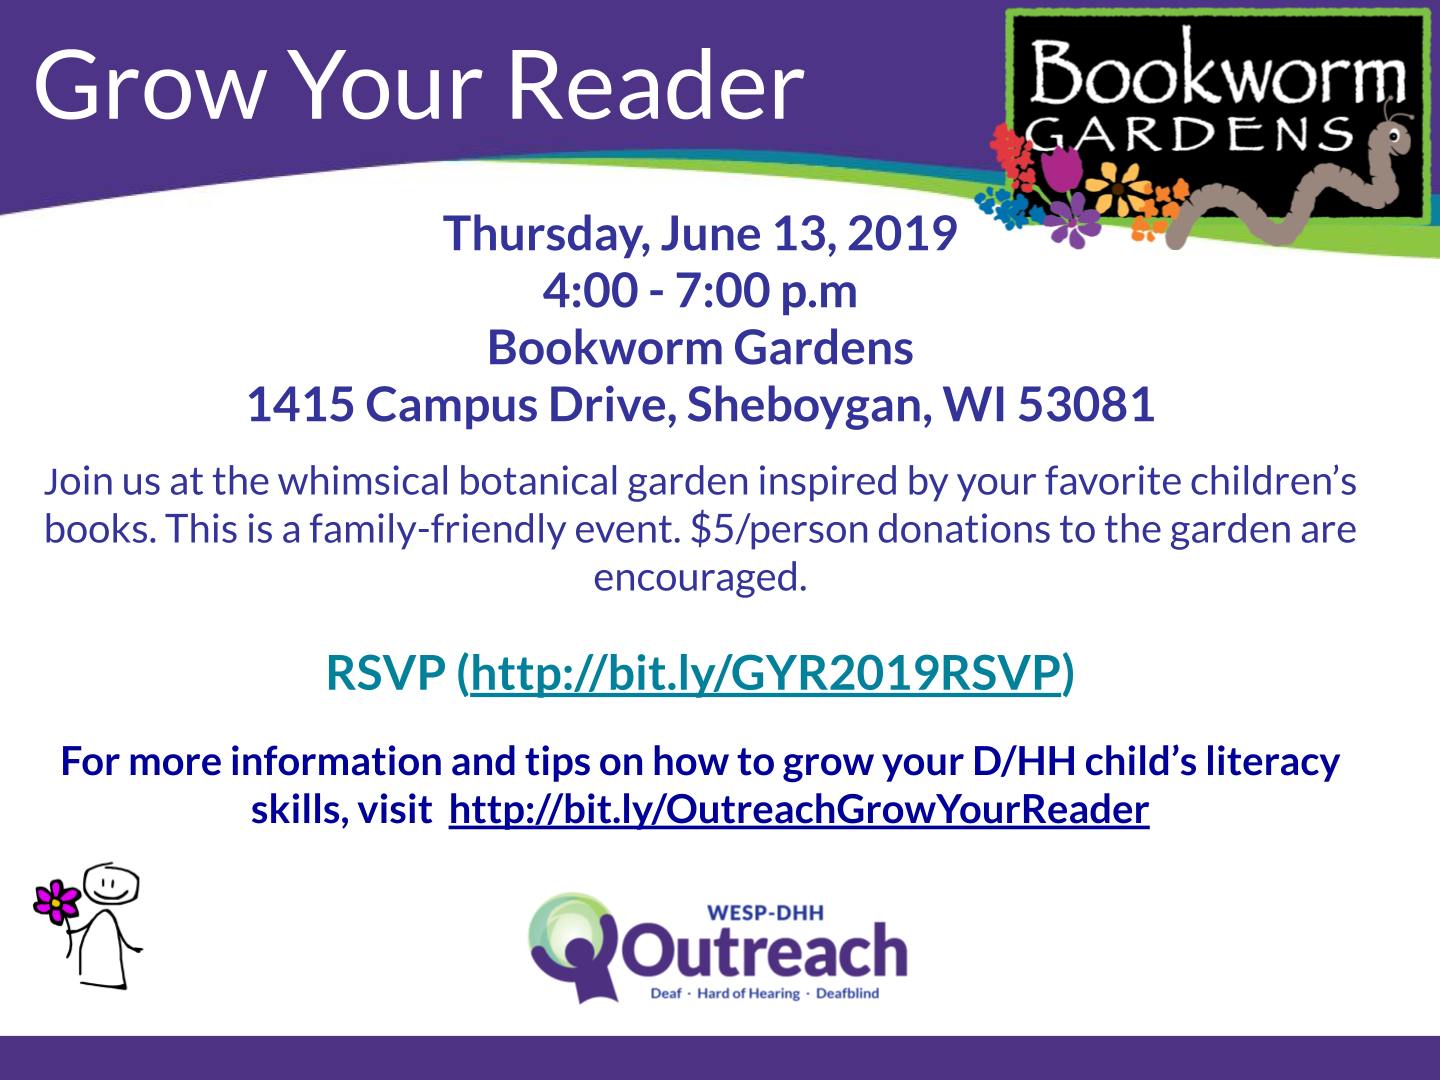 Promotional flyer for Grow Your Reader event, including the text outlined below.